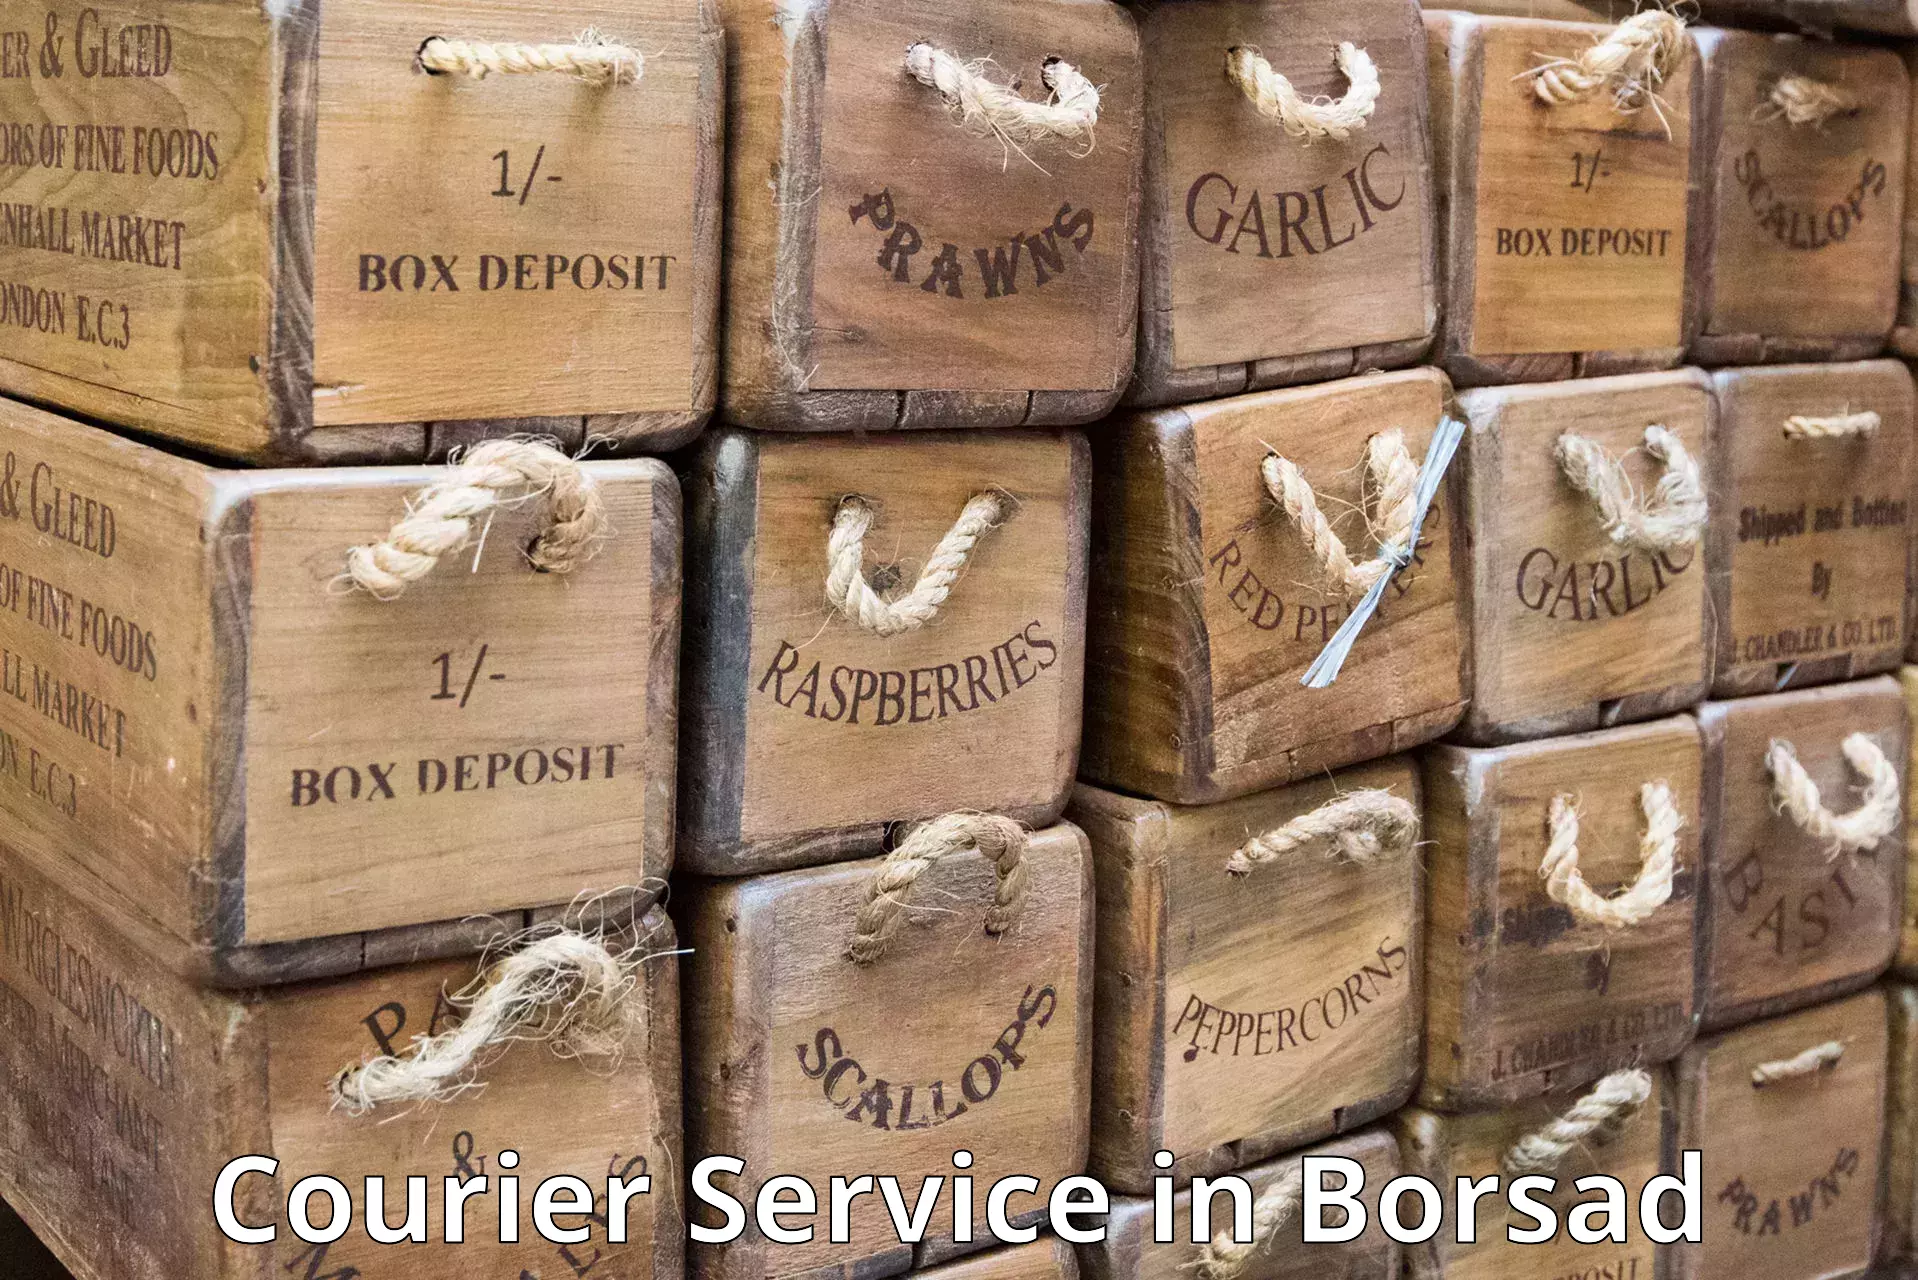 Courier service innovation in Borsad